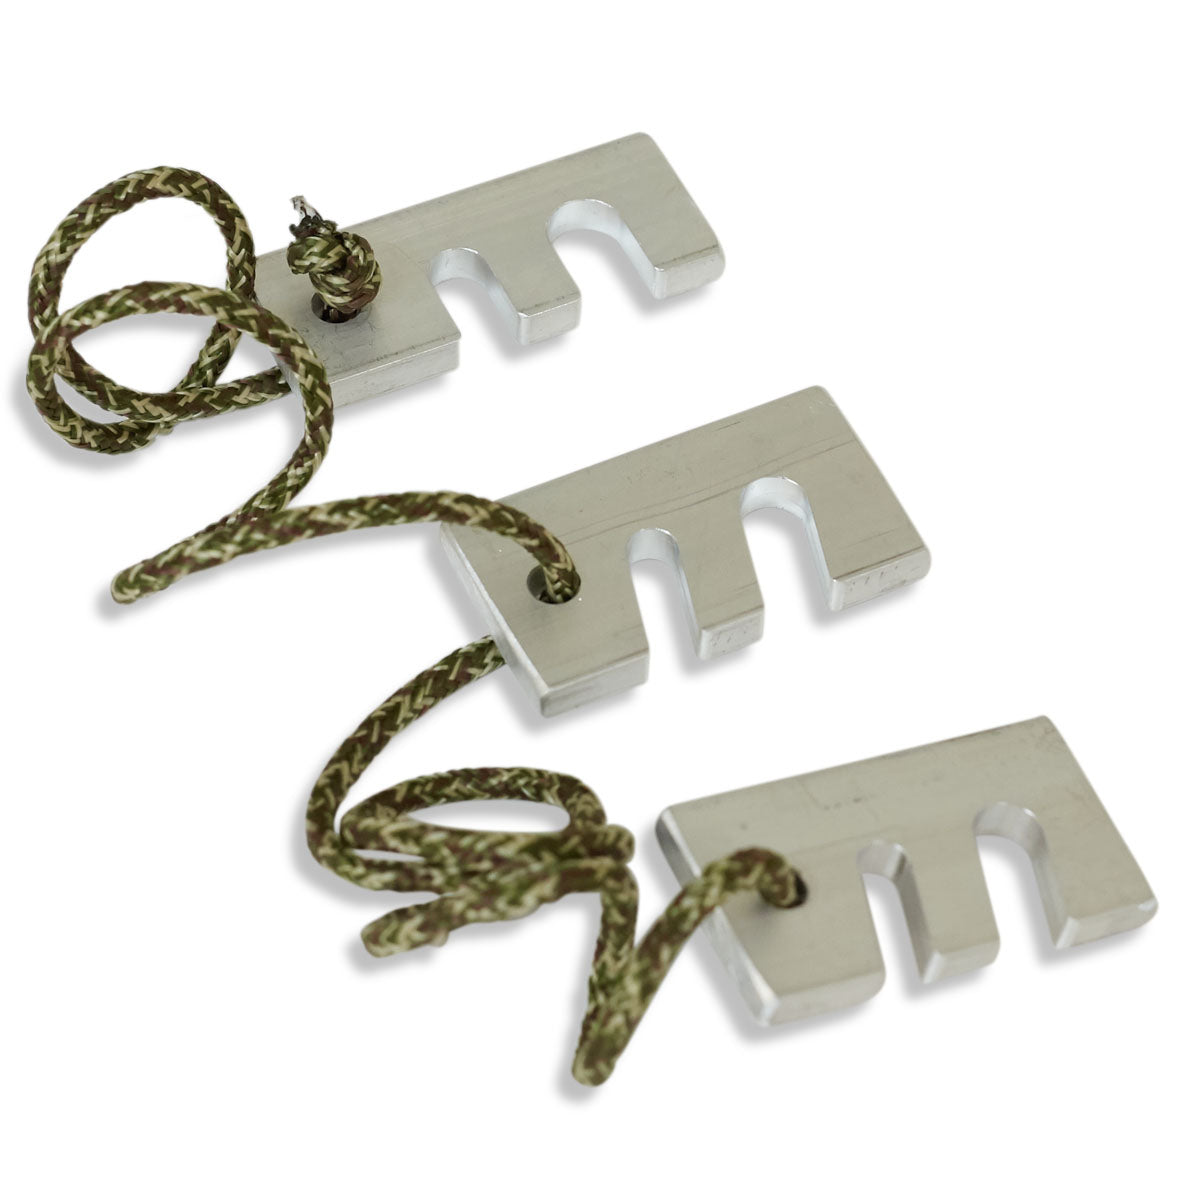 Tubing Tension Hooks for 5/16 and 3/16 Tubing —